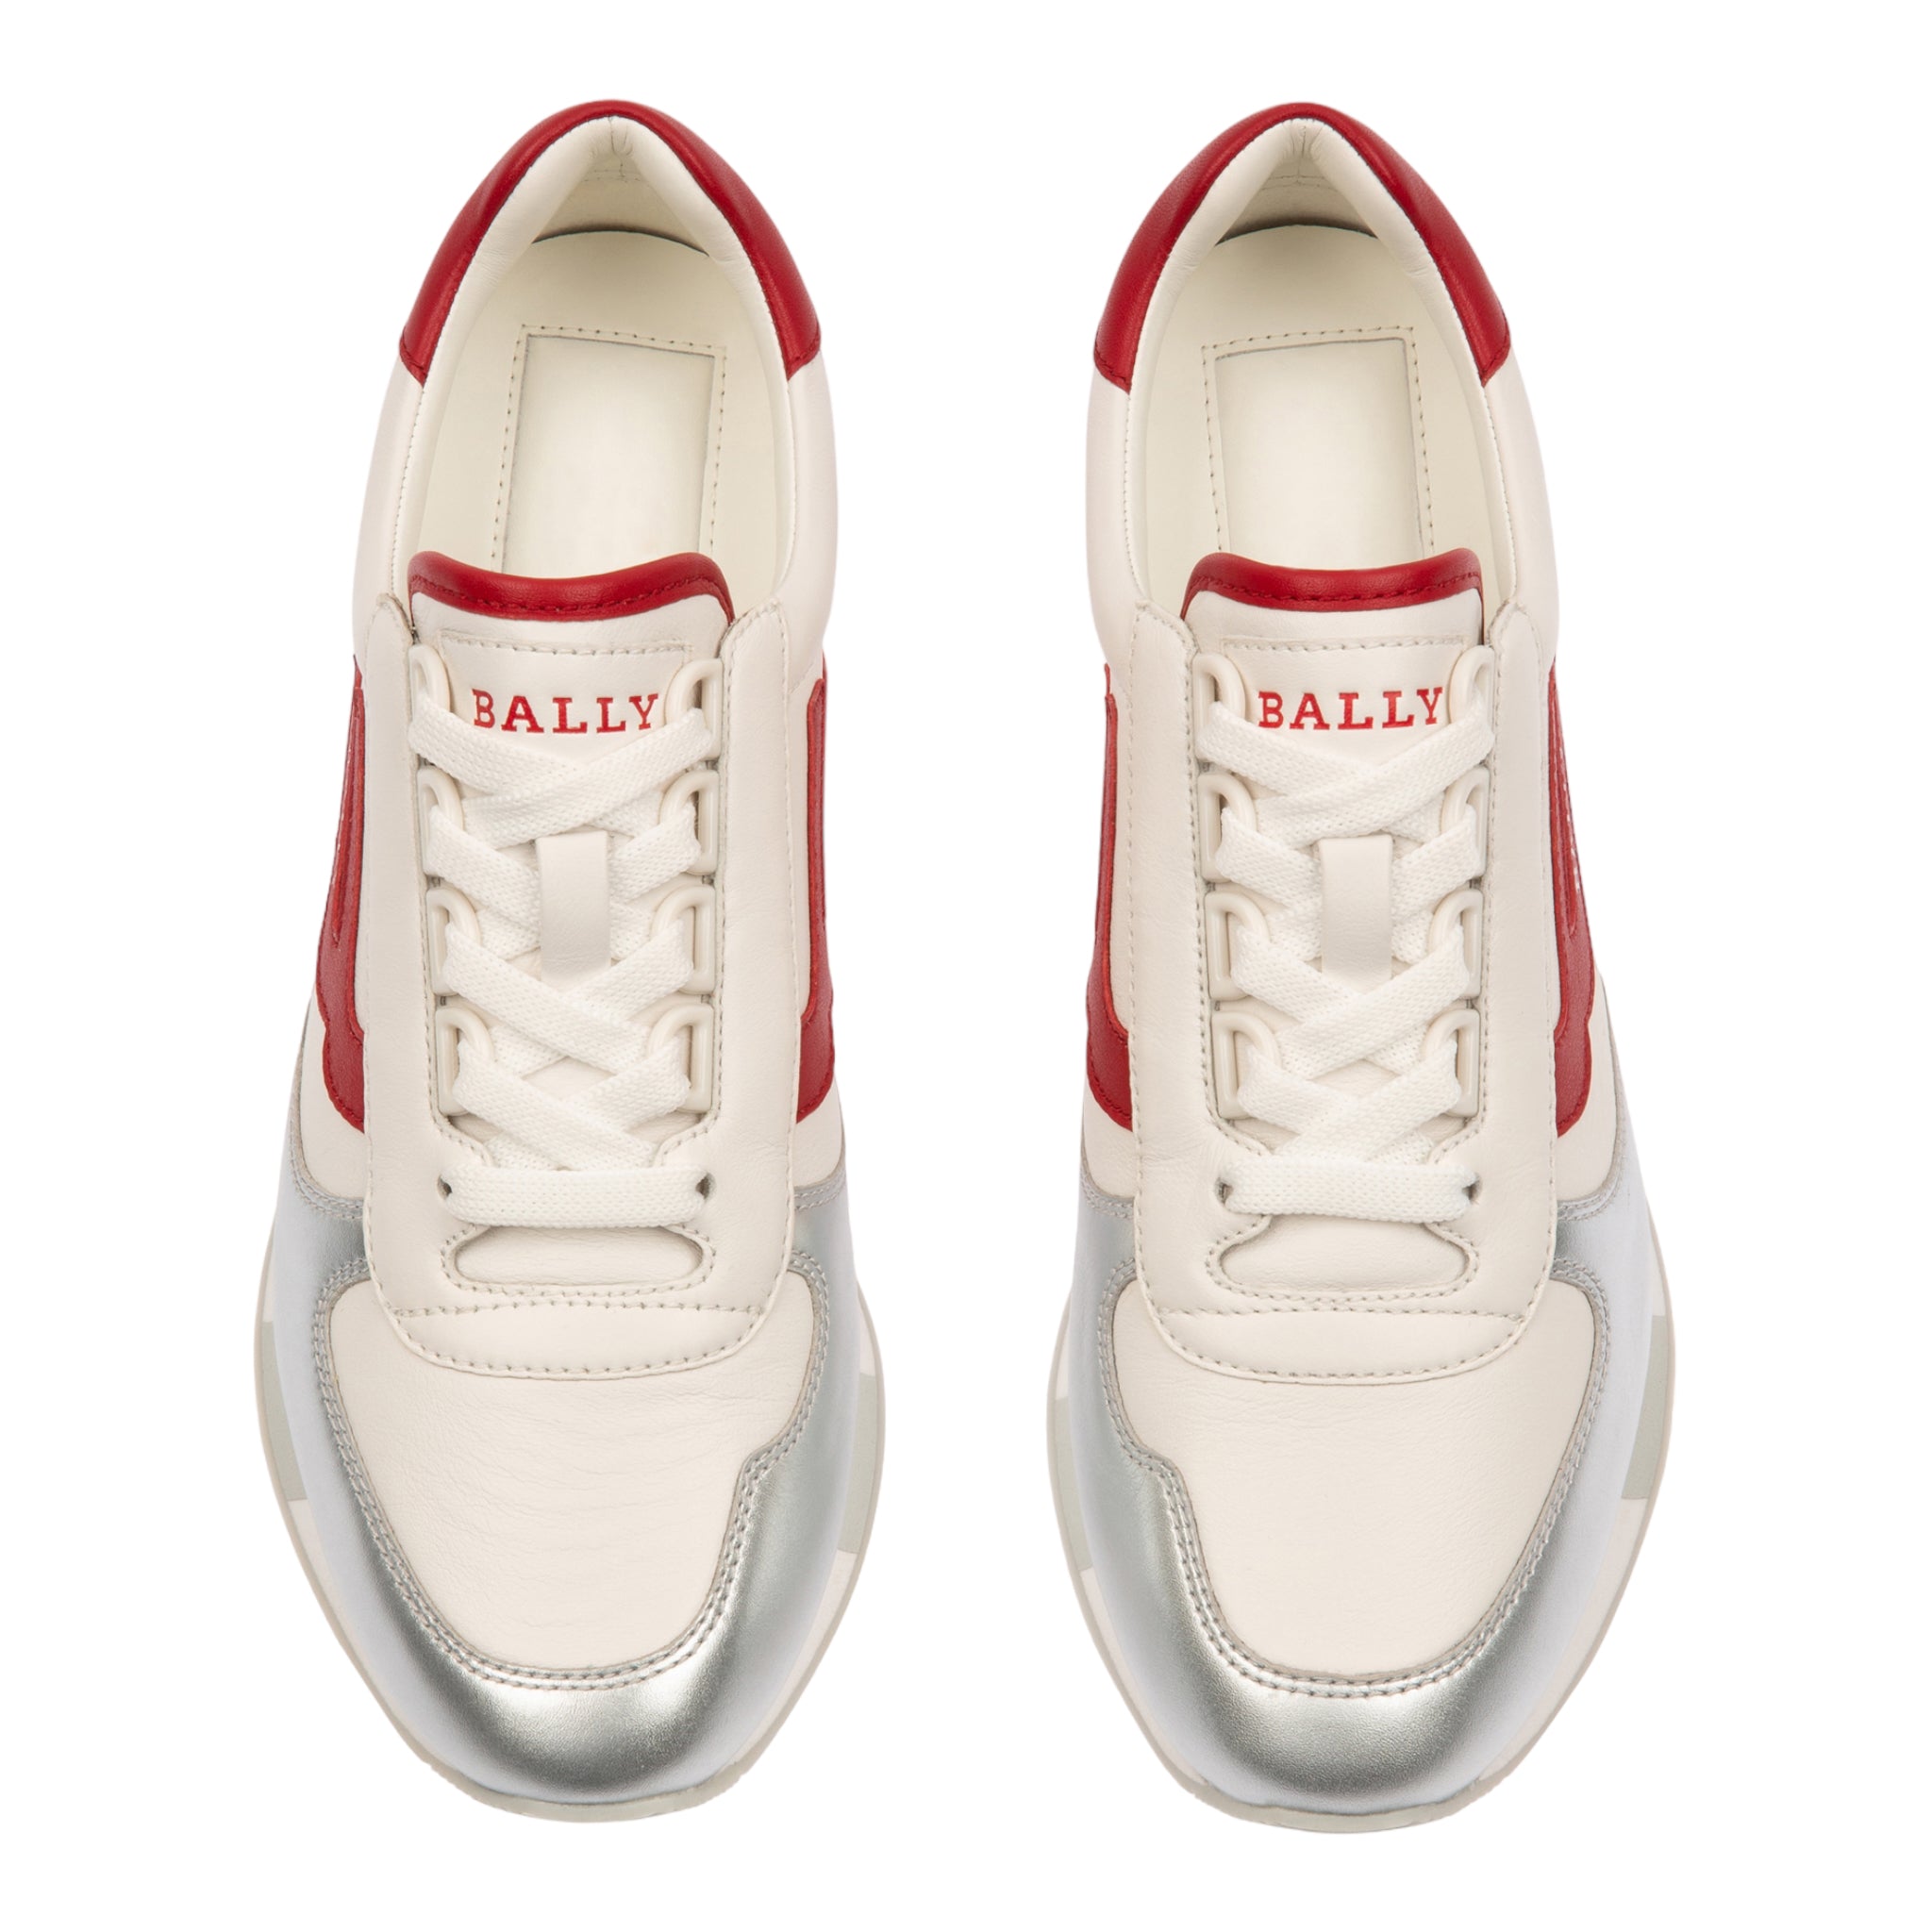 Bally logo-embossed leather sneakers - White